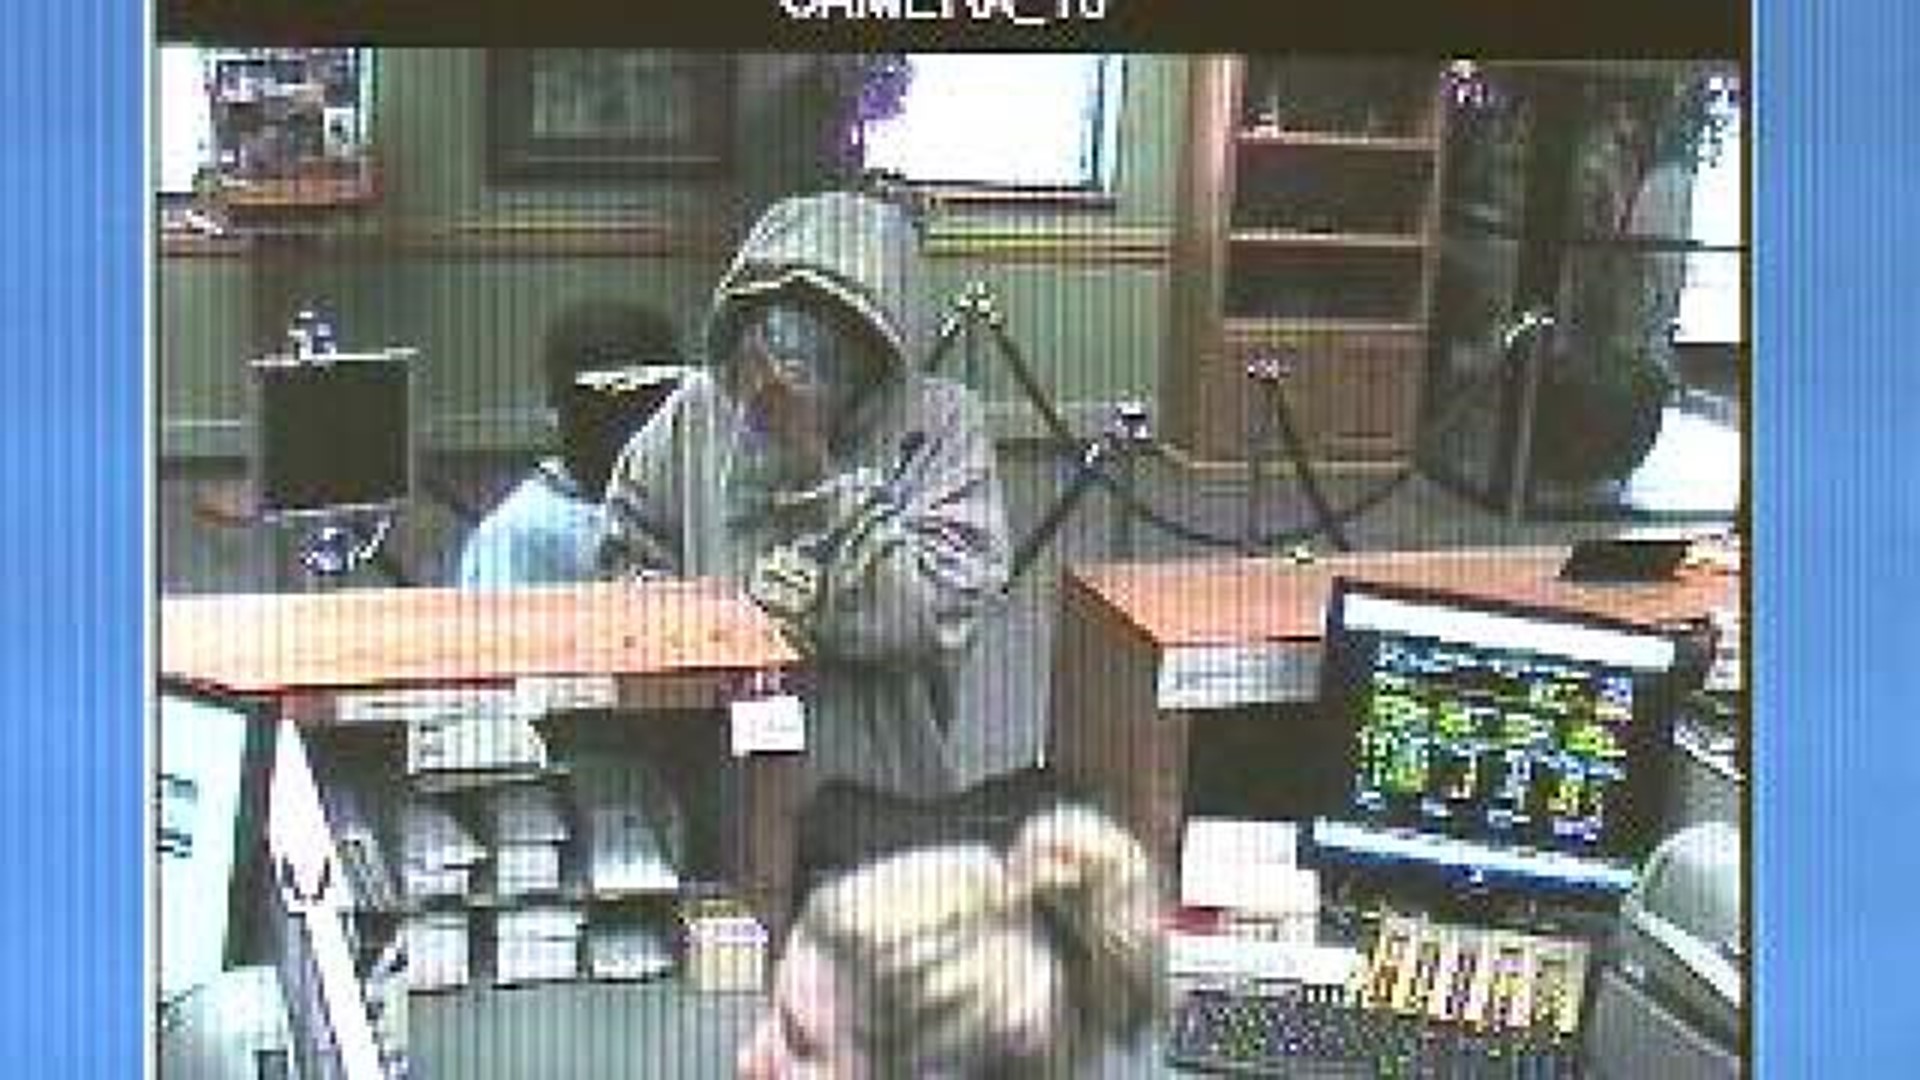 Both Bank Robbery Suspects Now in Custody